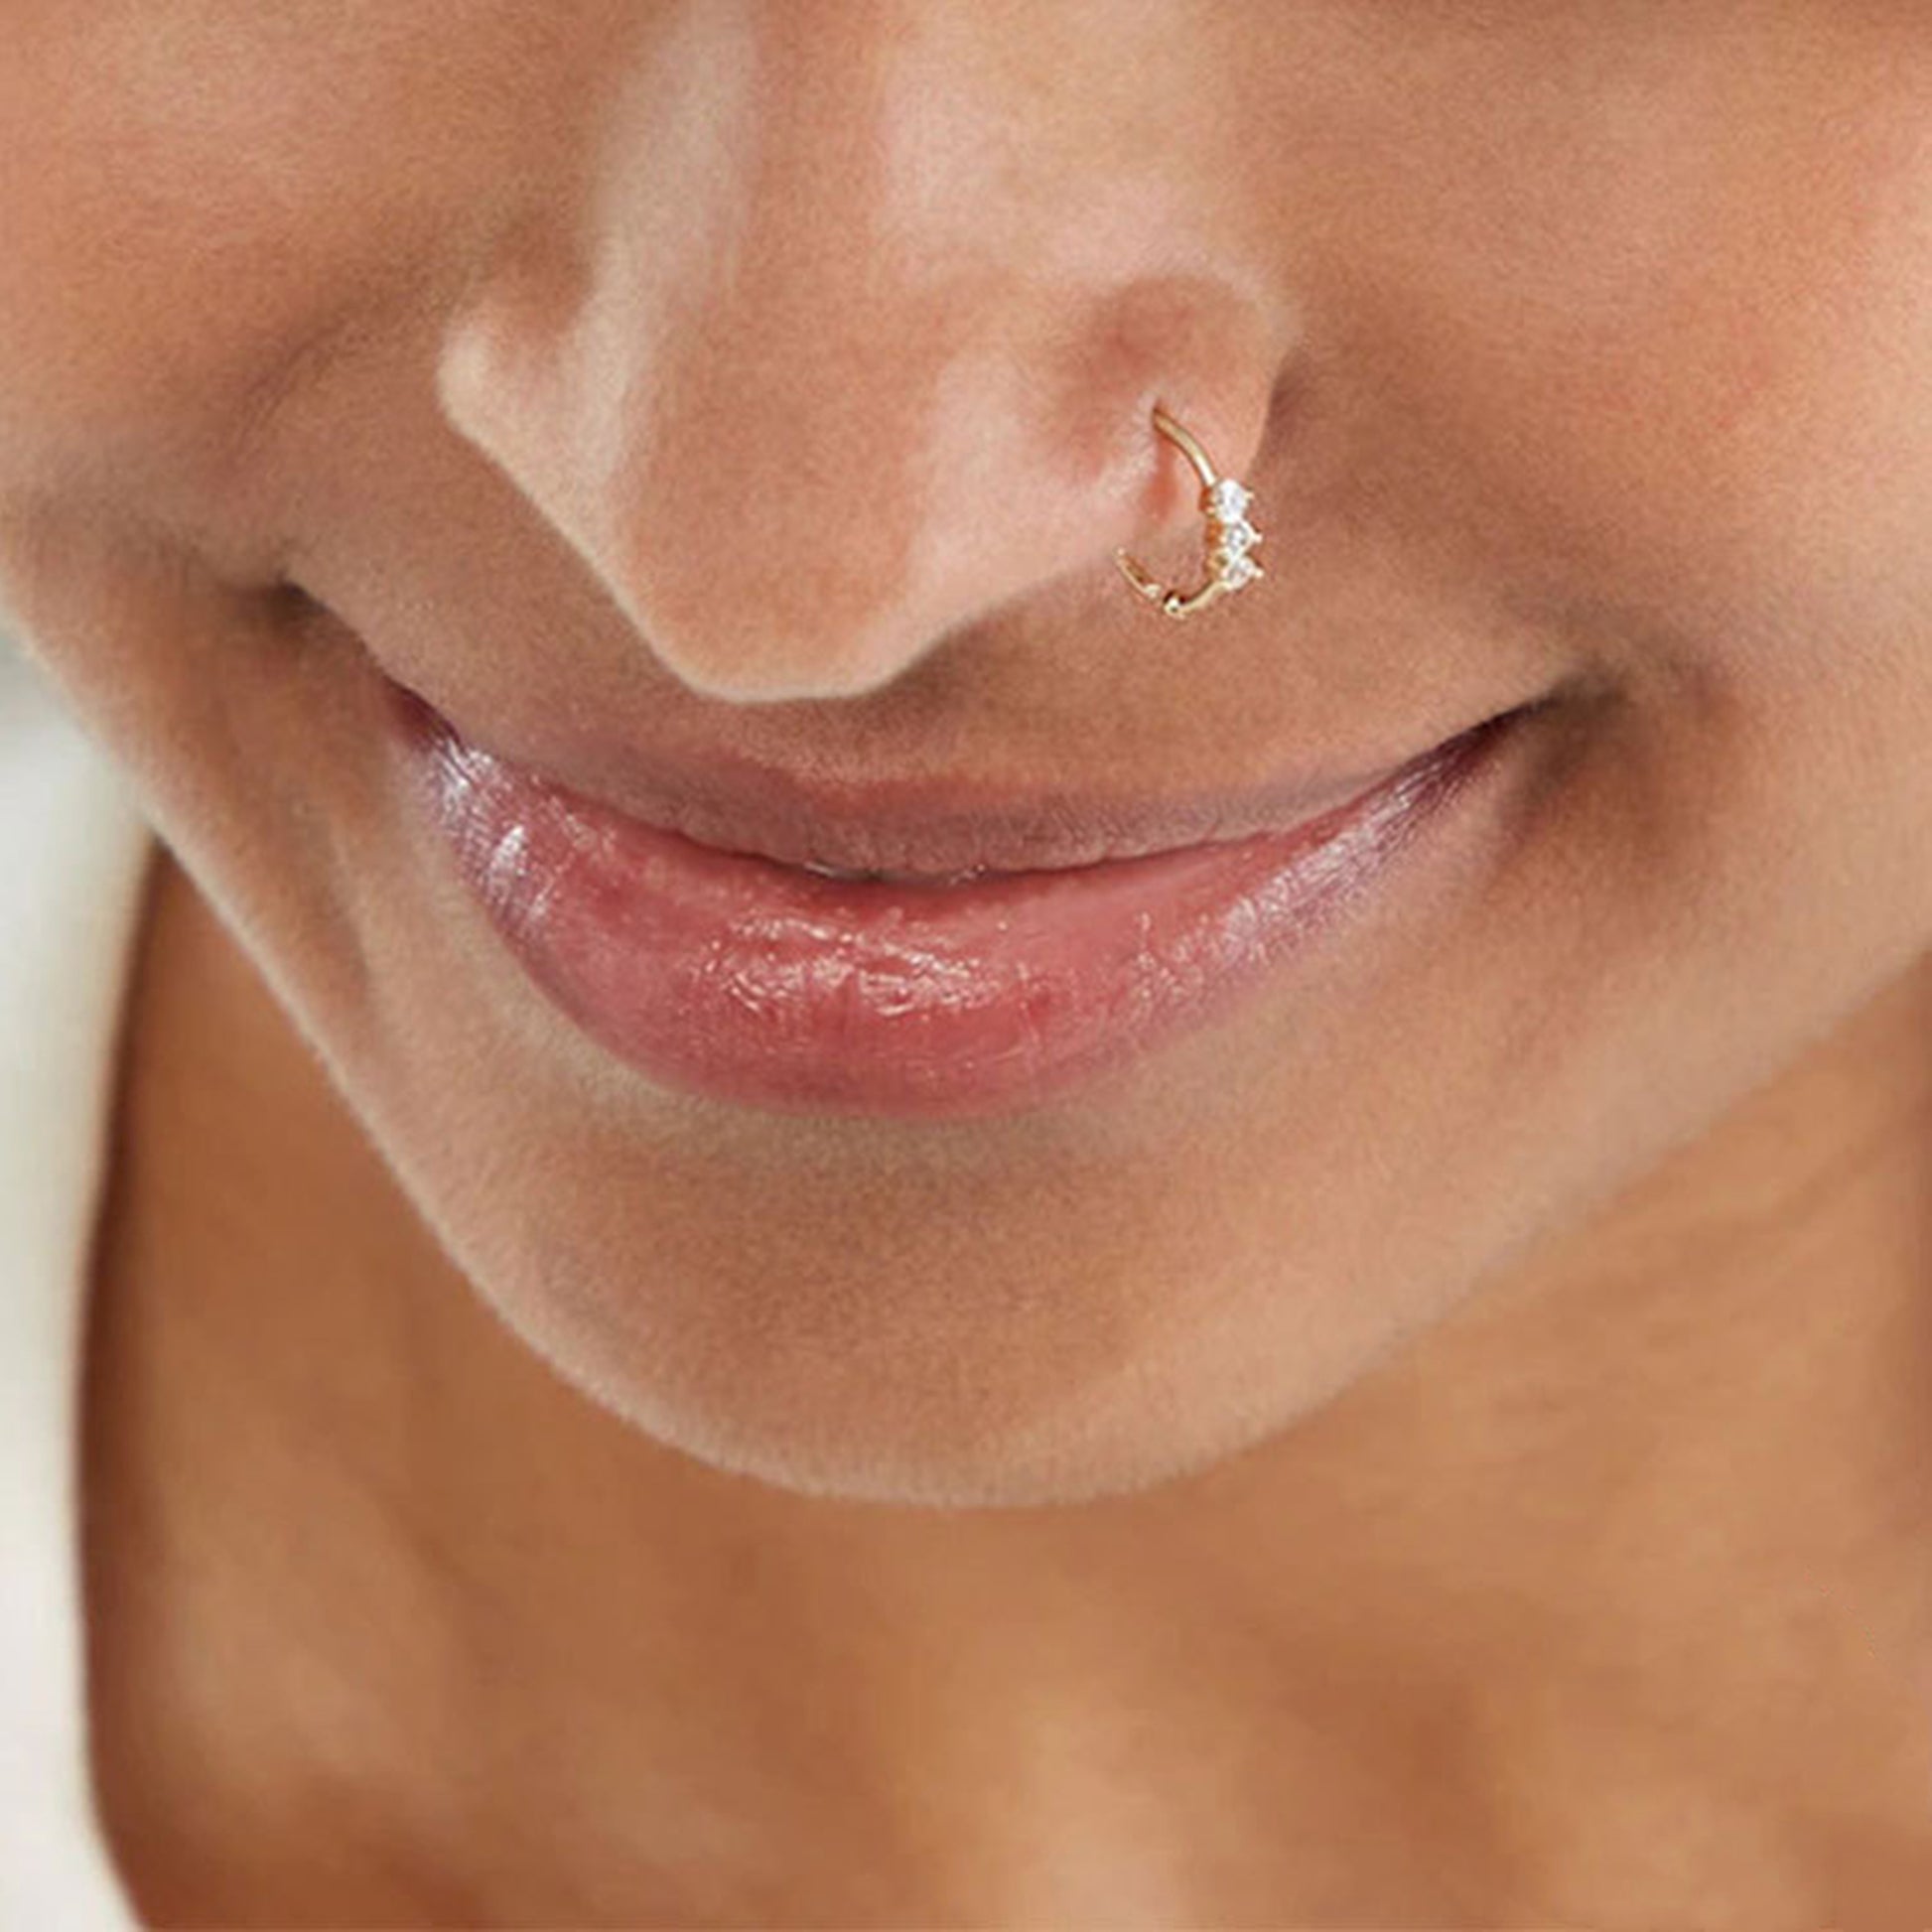 Sterling Silver Nose Ring Nose Hoop Paved CZ Crystal Flower Three Stones 2 Tones - sugarkittenlondon